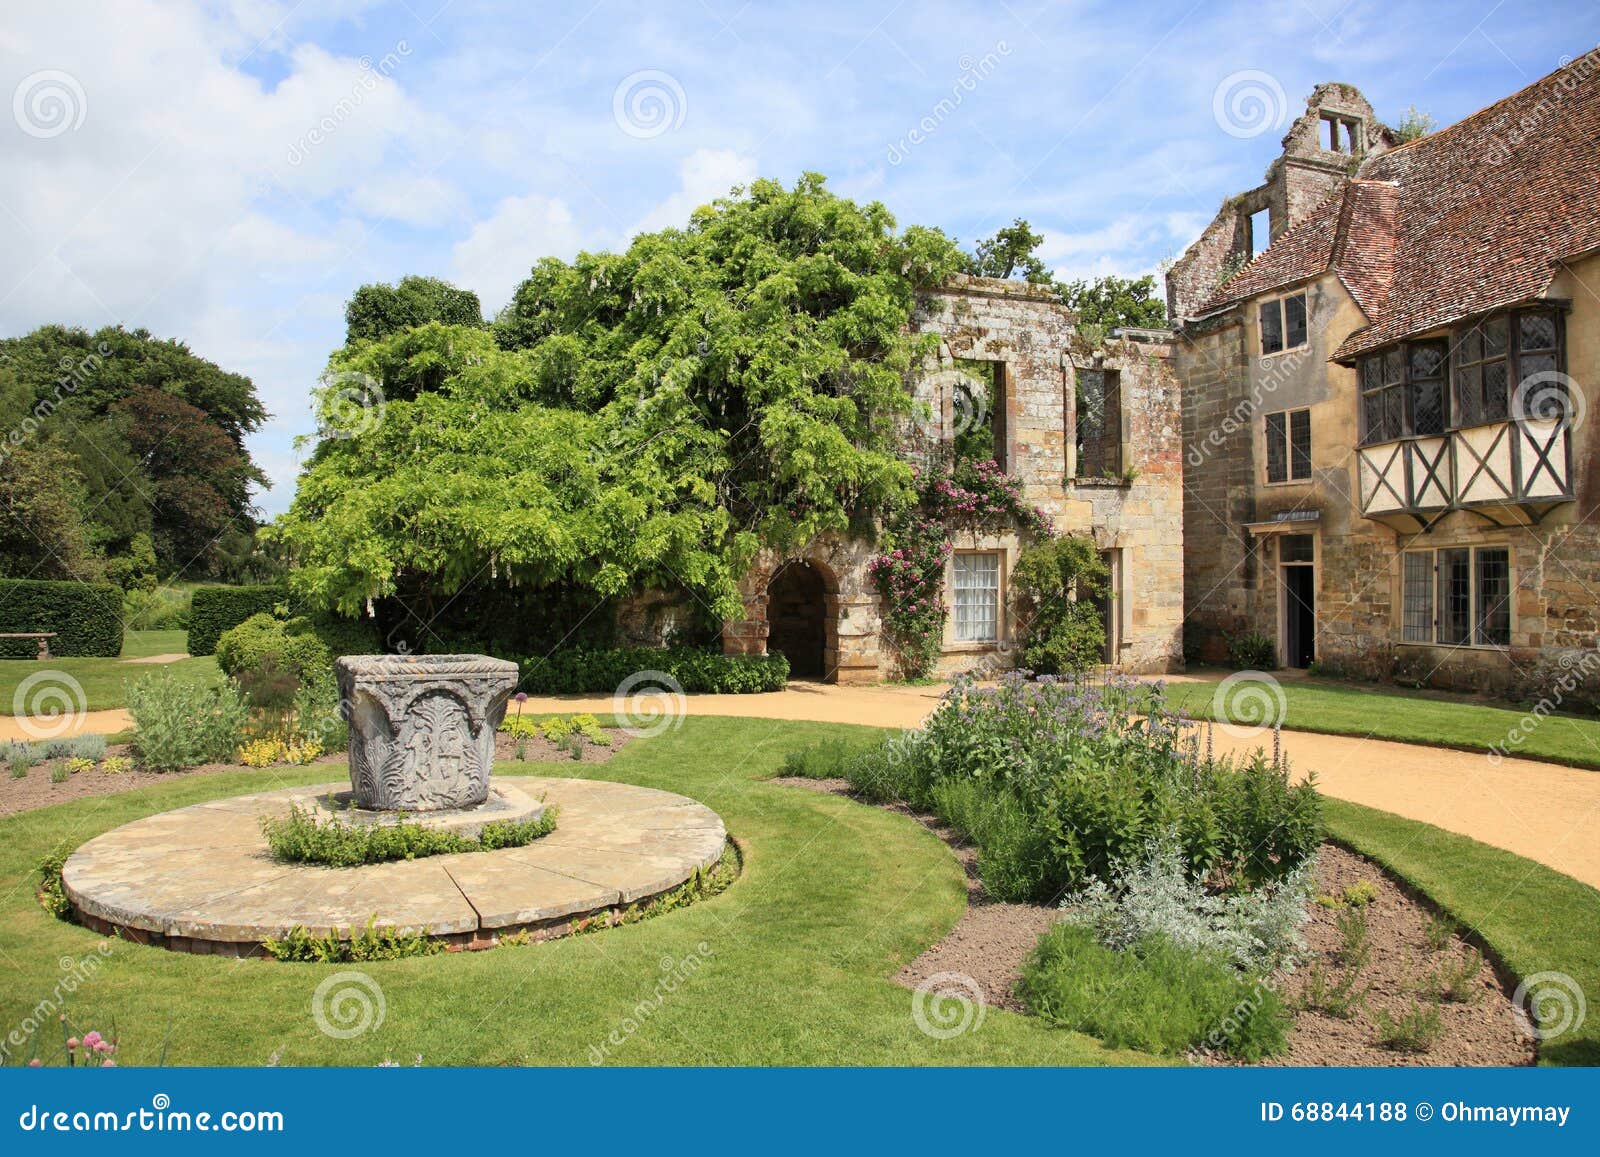 Traditional English Garden Stock Photo Image Of Architecture 68844188